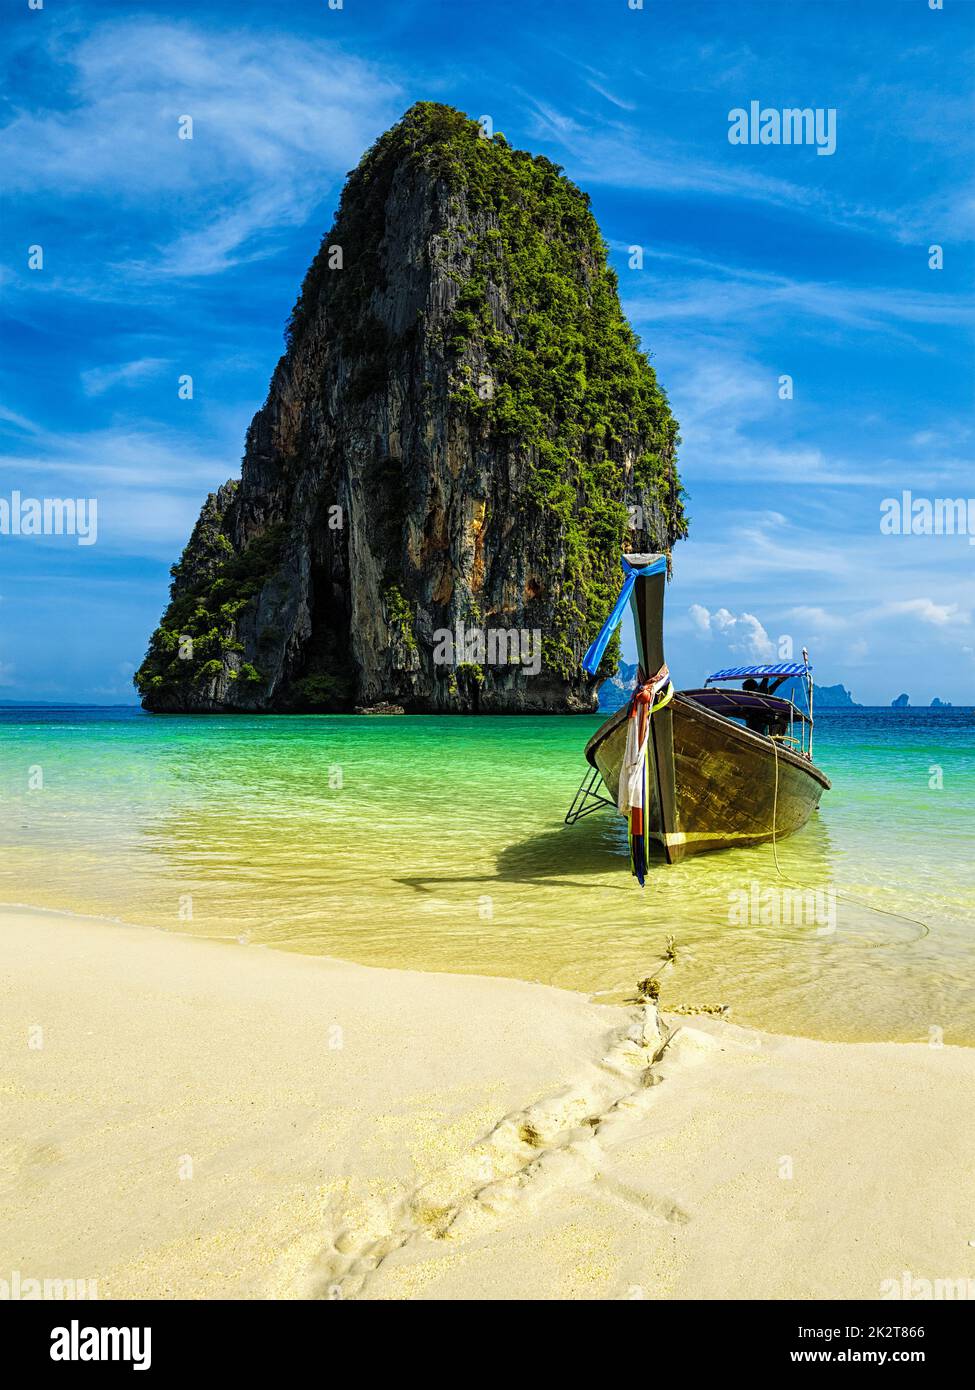 Long tail boat on beach, Thailand Stock Photo